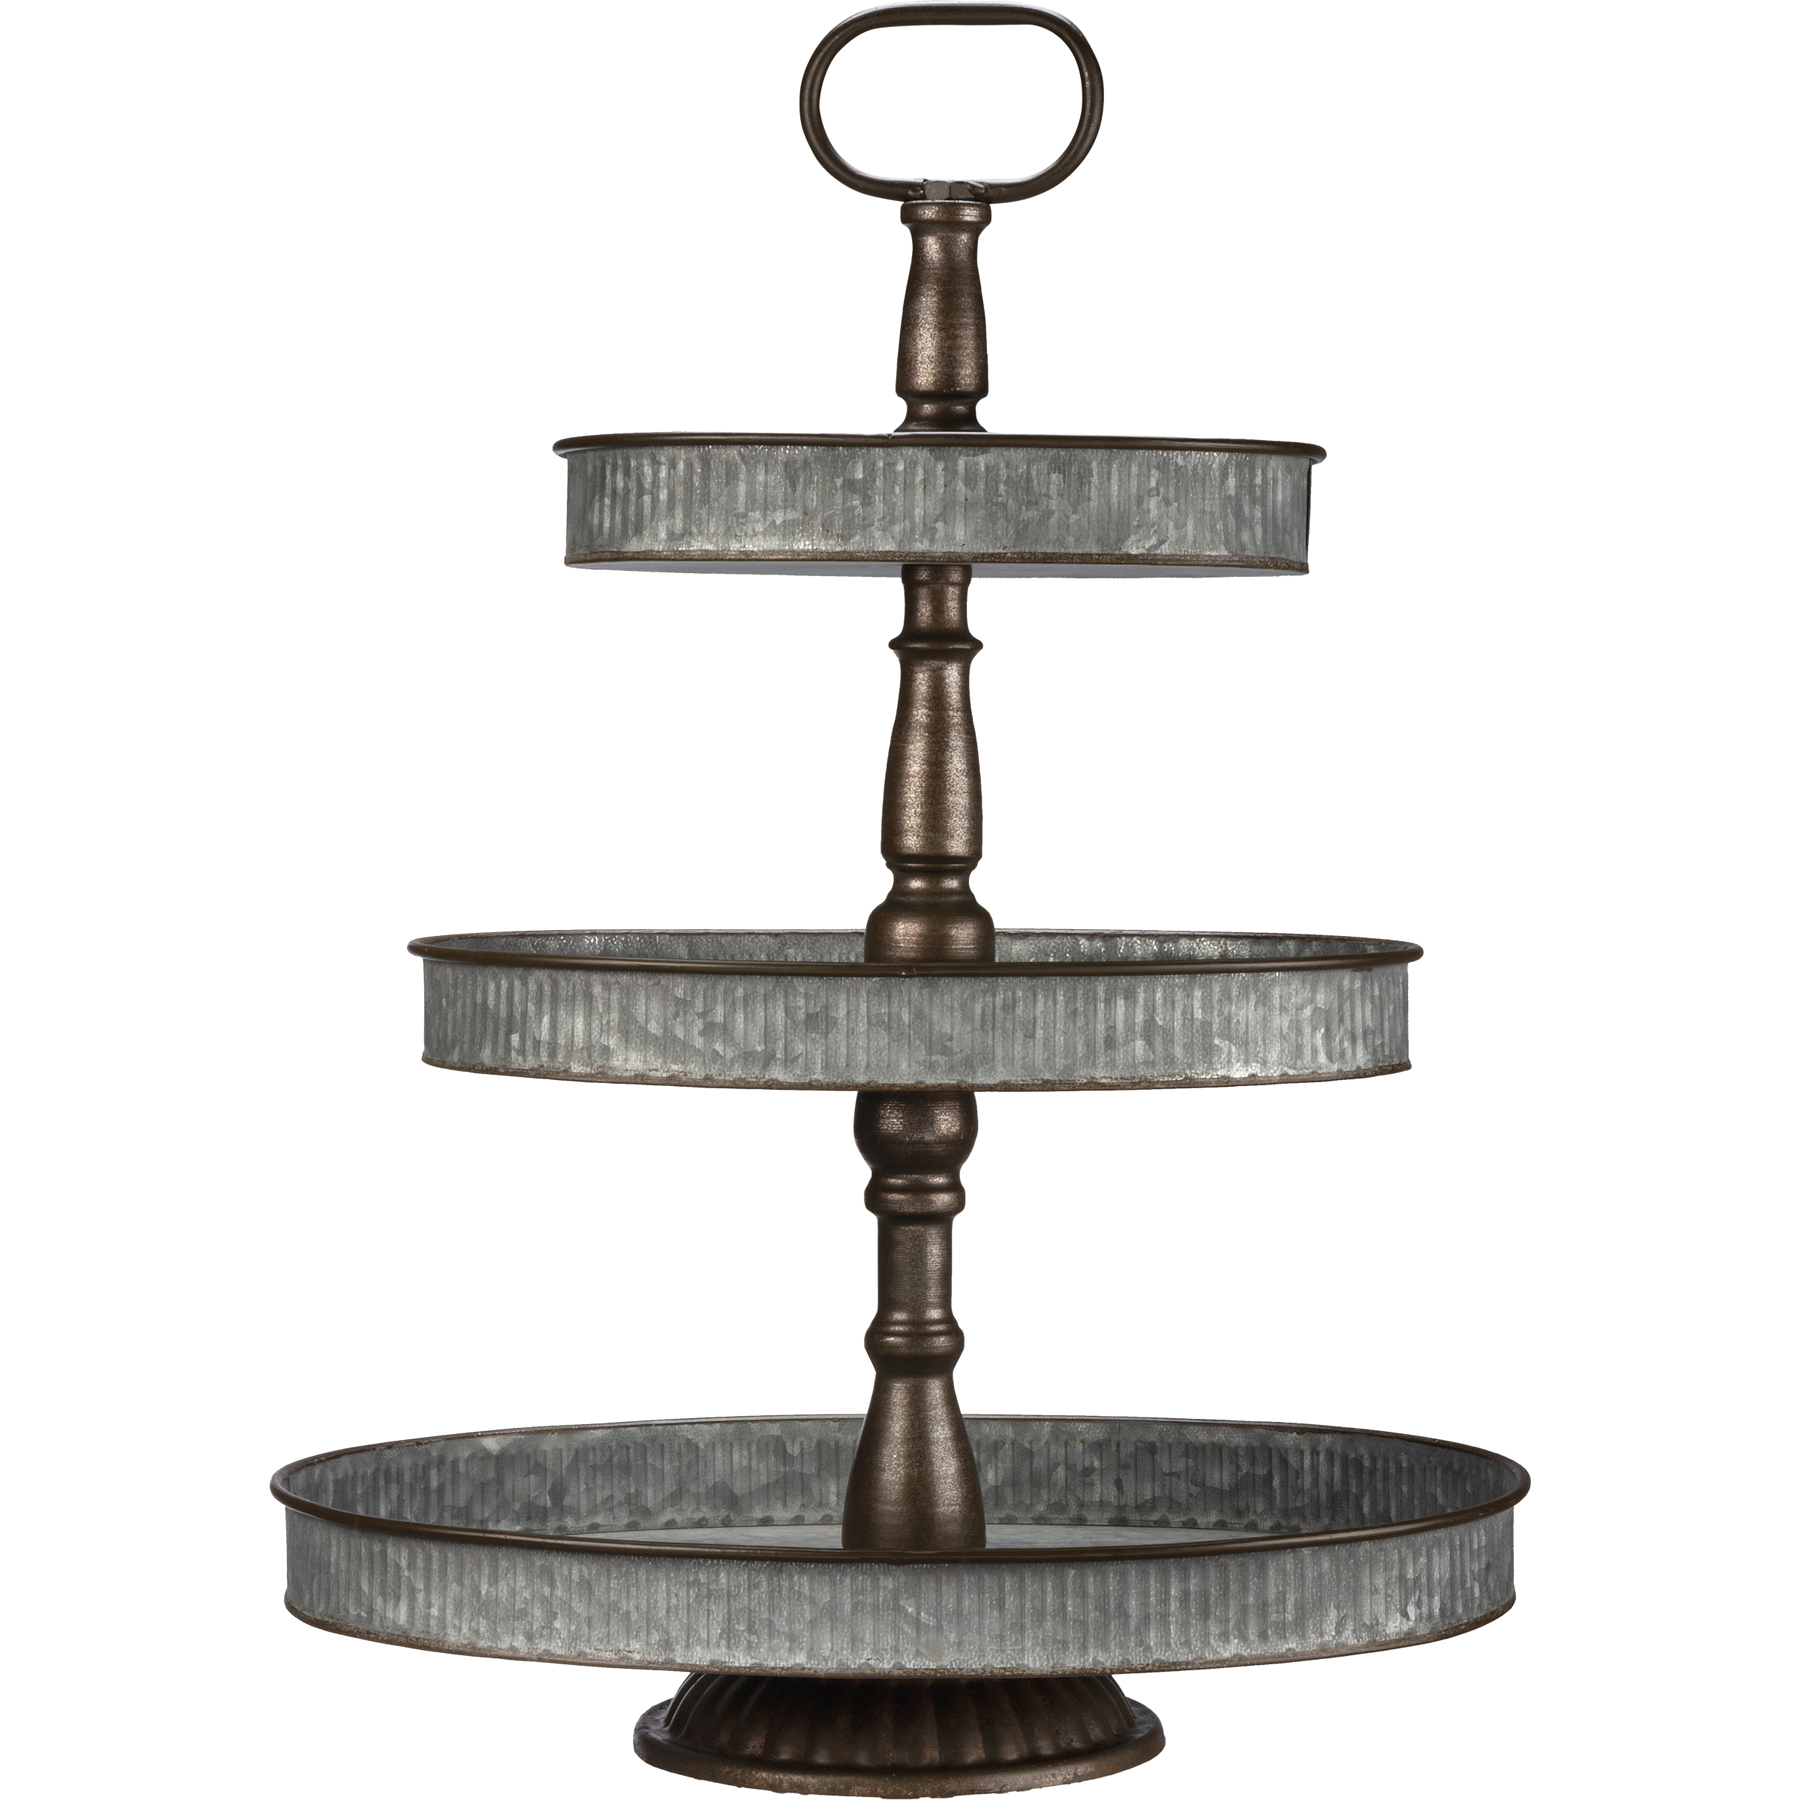 Primitives by Kathy Rustic 3 Tier Round Tray Display Farmhouse Galvanized Metal